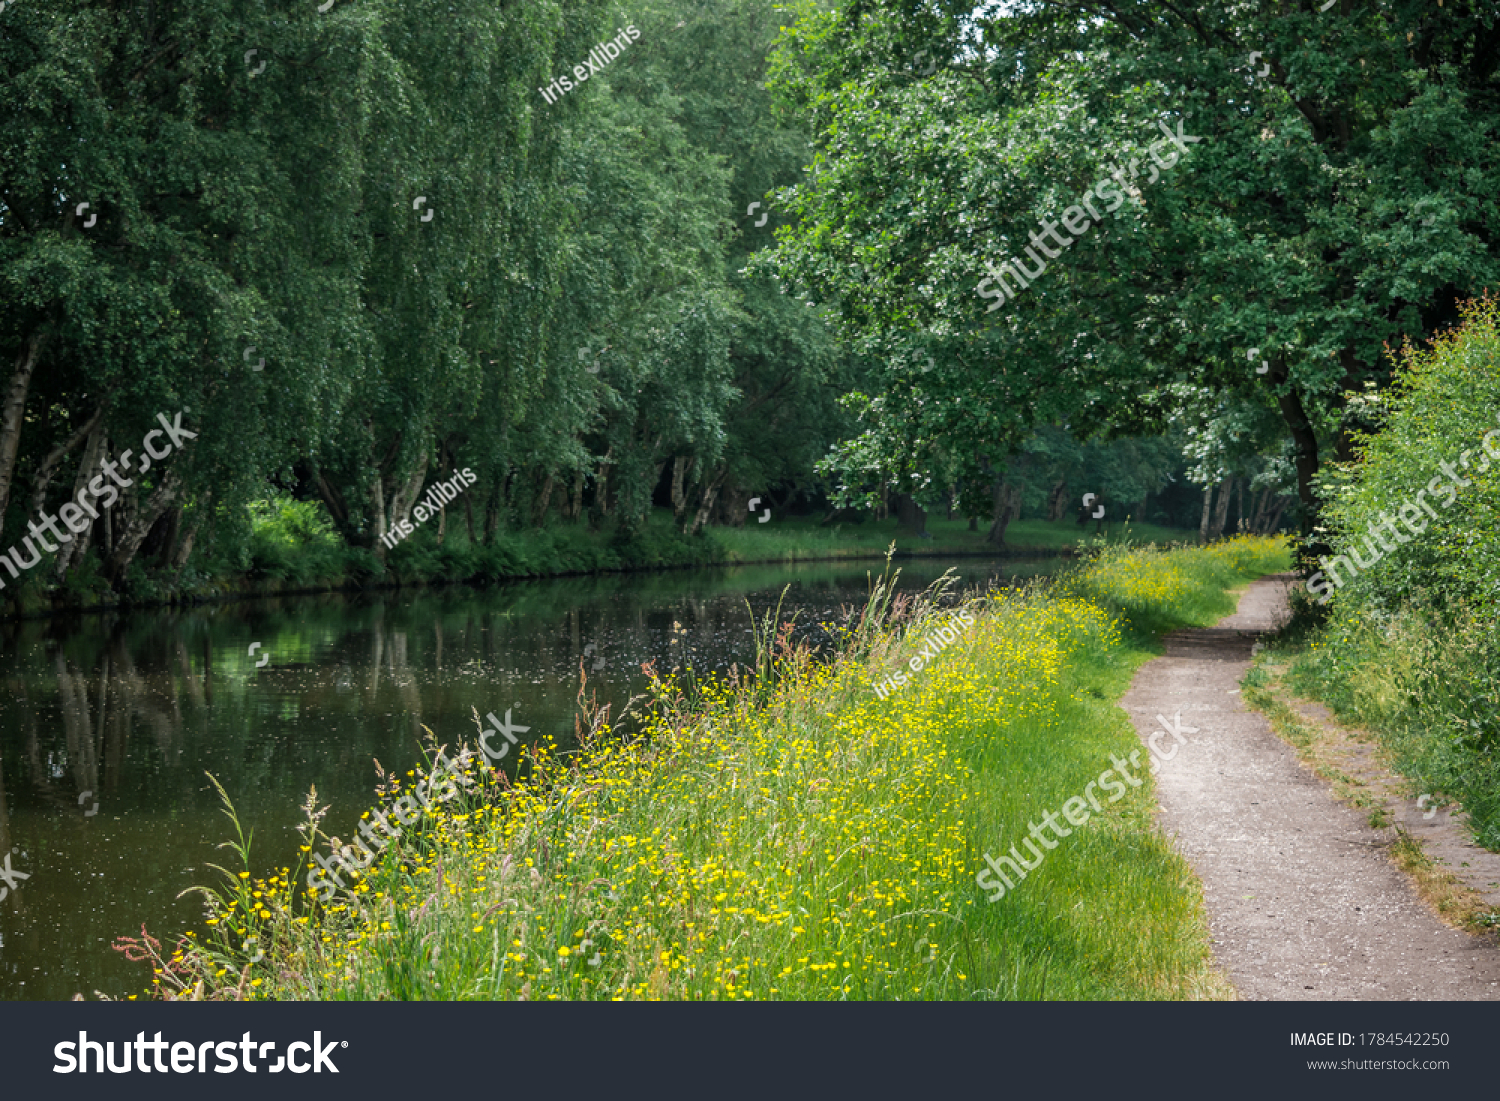 The path along The Bridgewater Canal in Cheshire, England  #1784542250